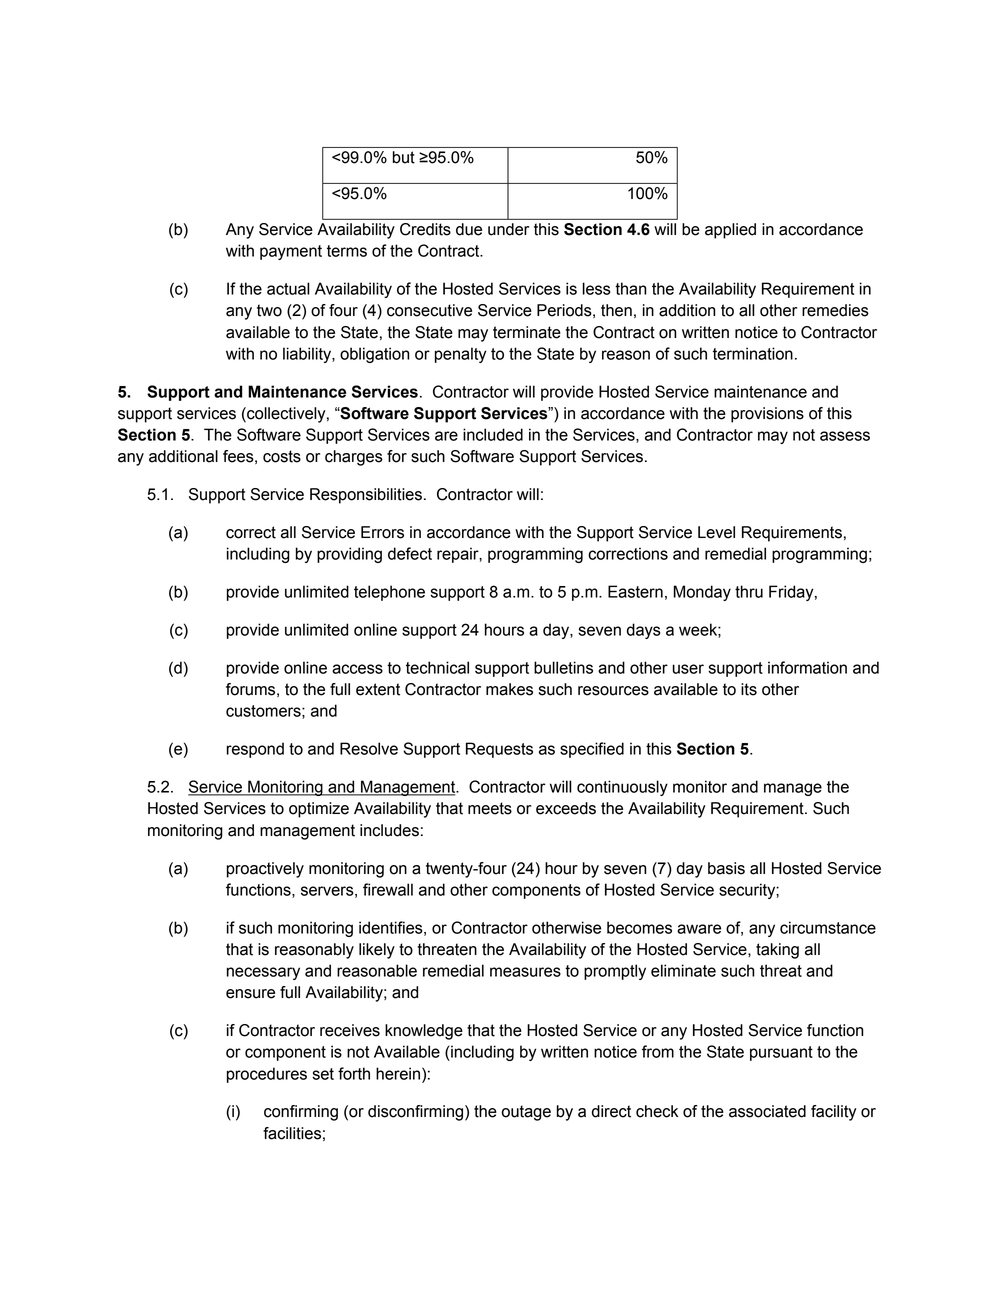 Page 63 from State of Michigan 2020 Kaseware contract